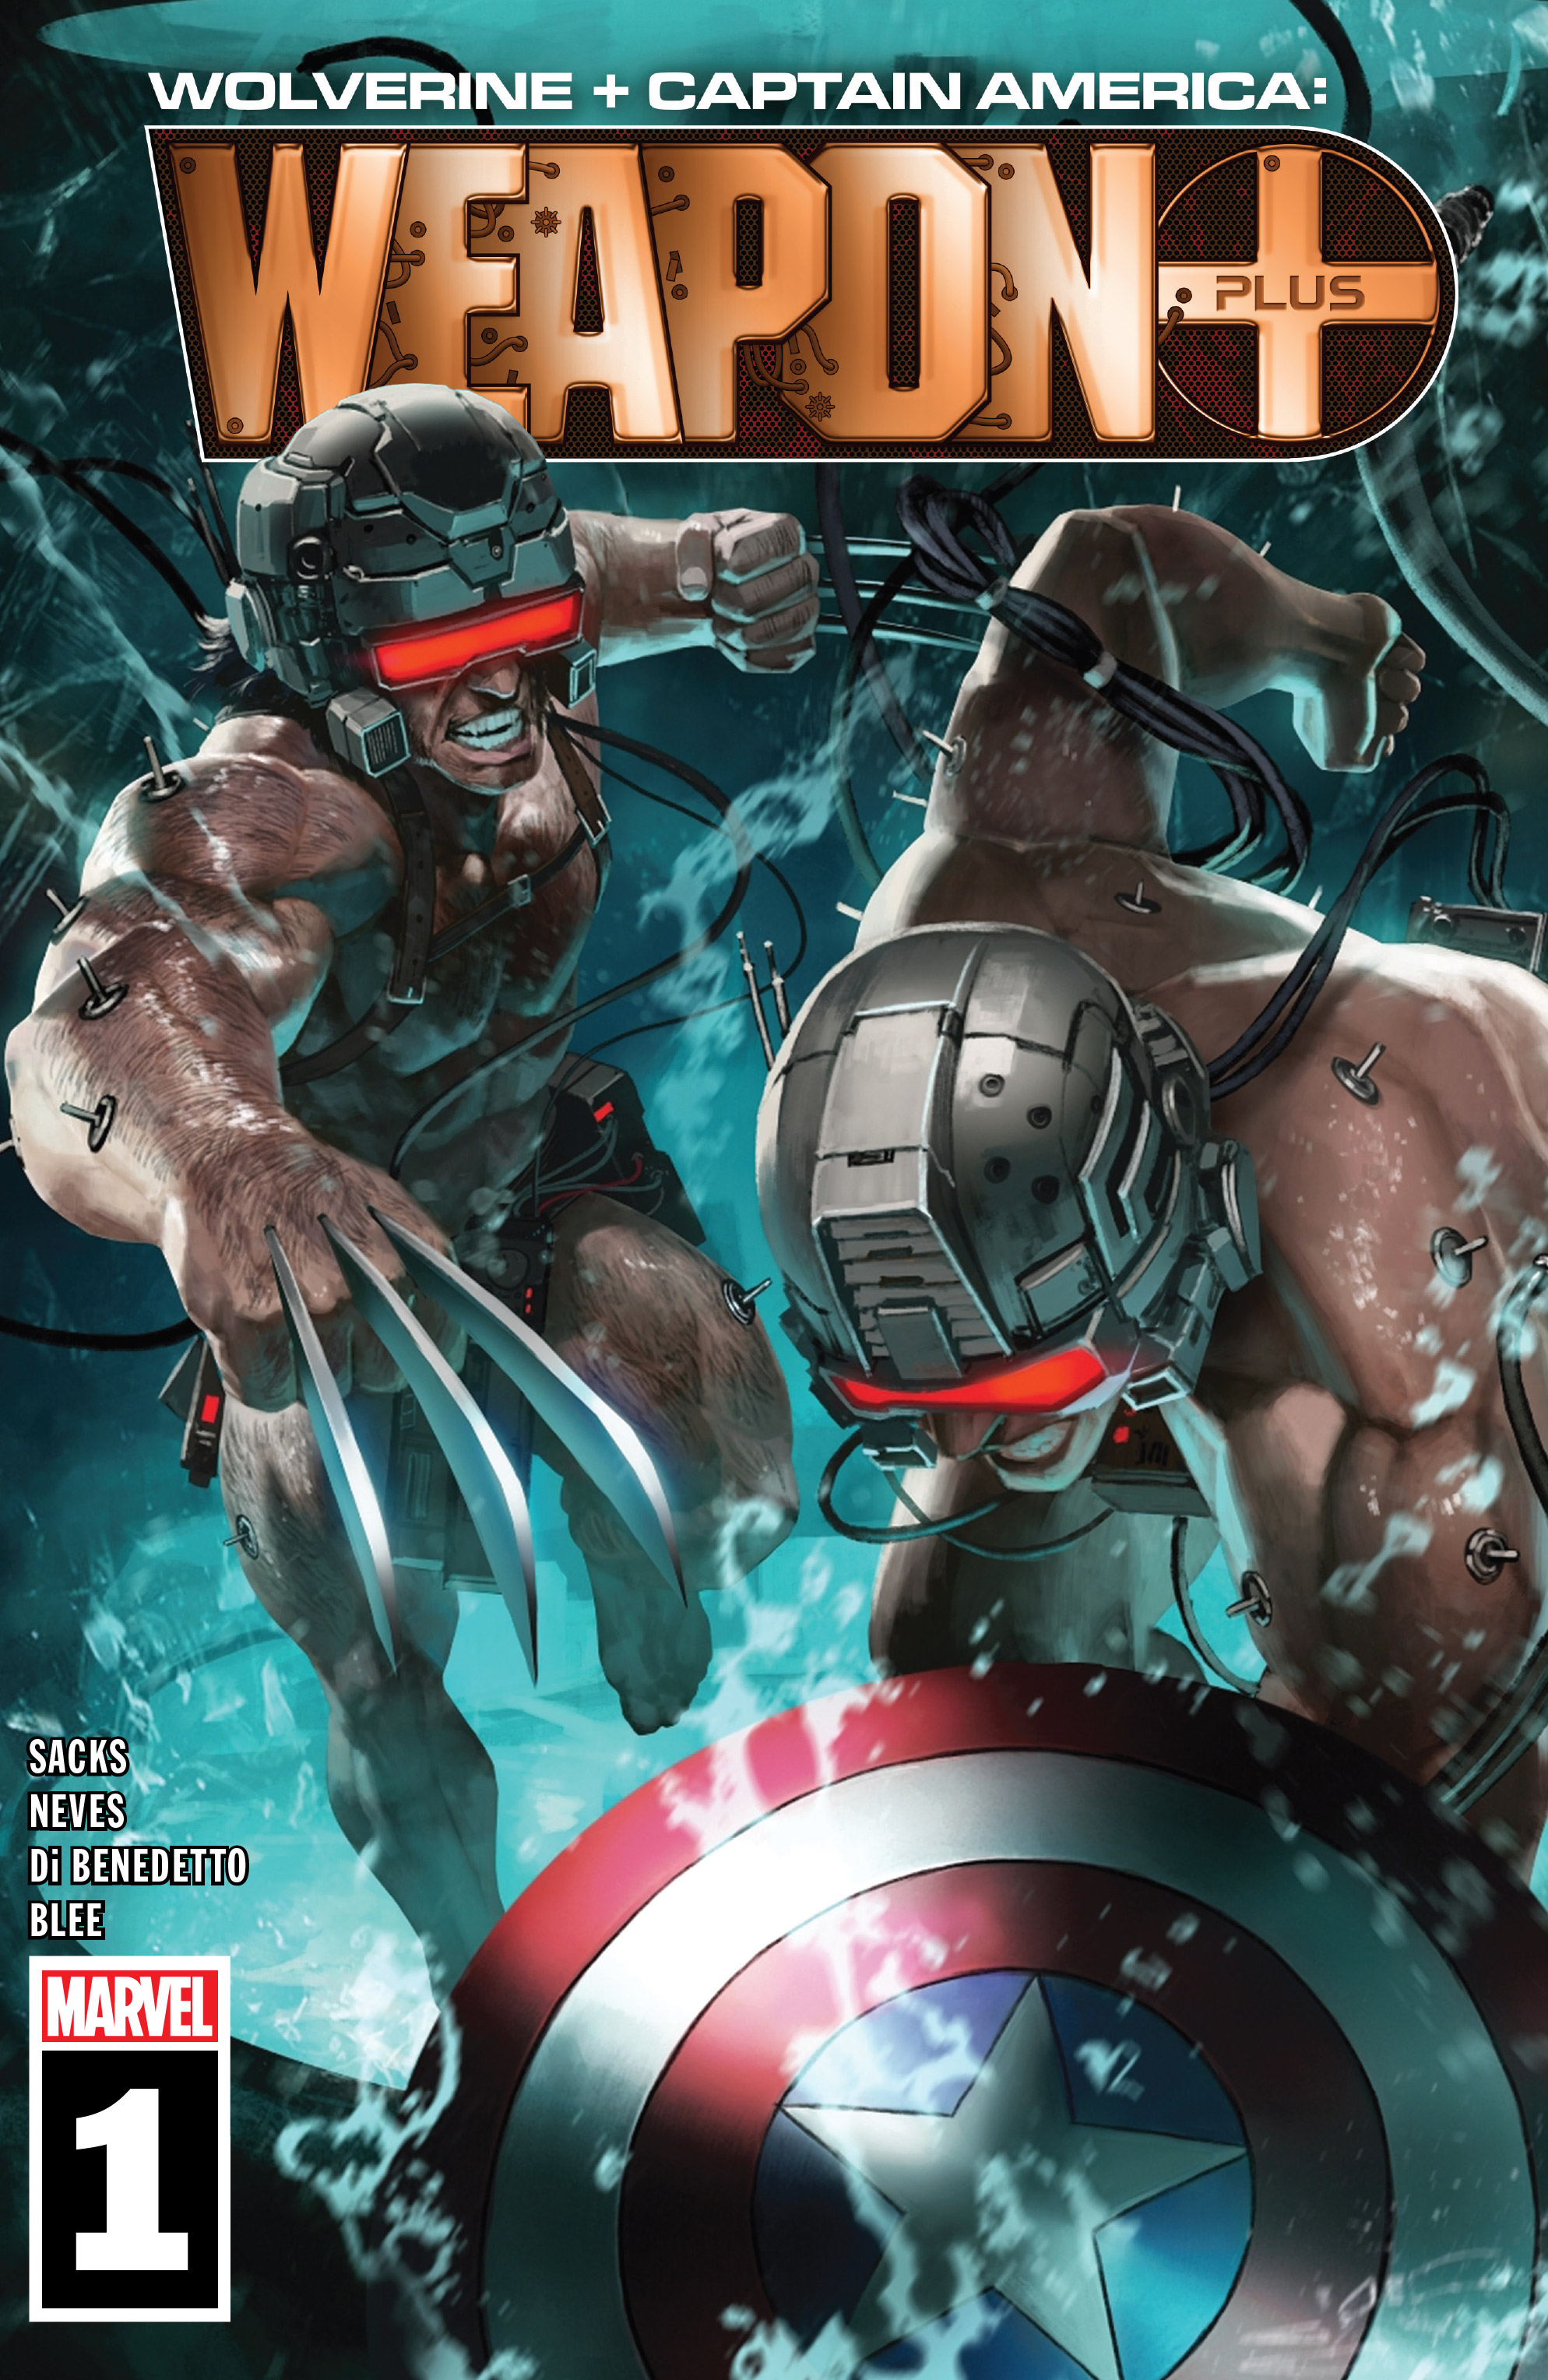 Read online Wolverine & Captain America: Weapon Plus comic -  Issue # Full - 1